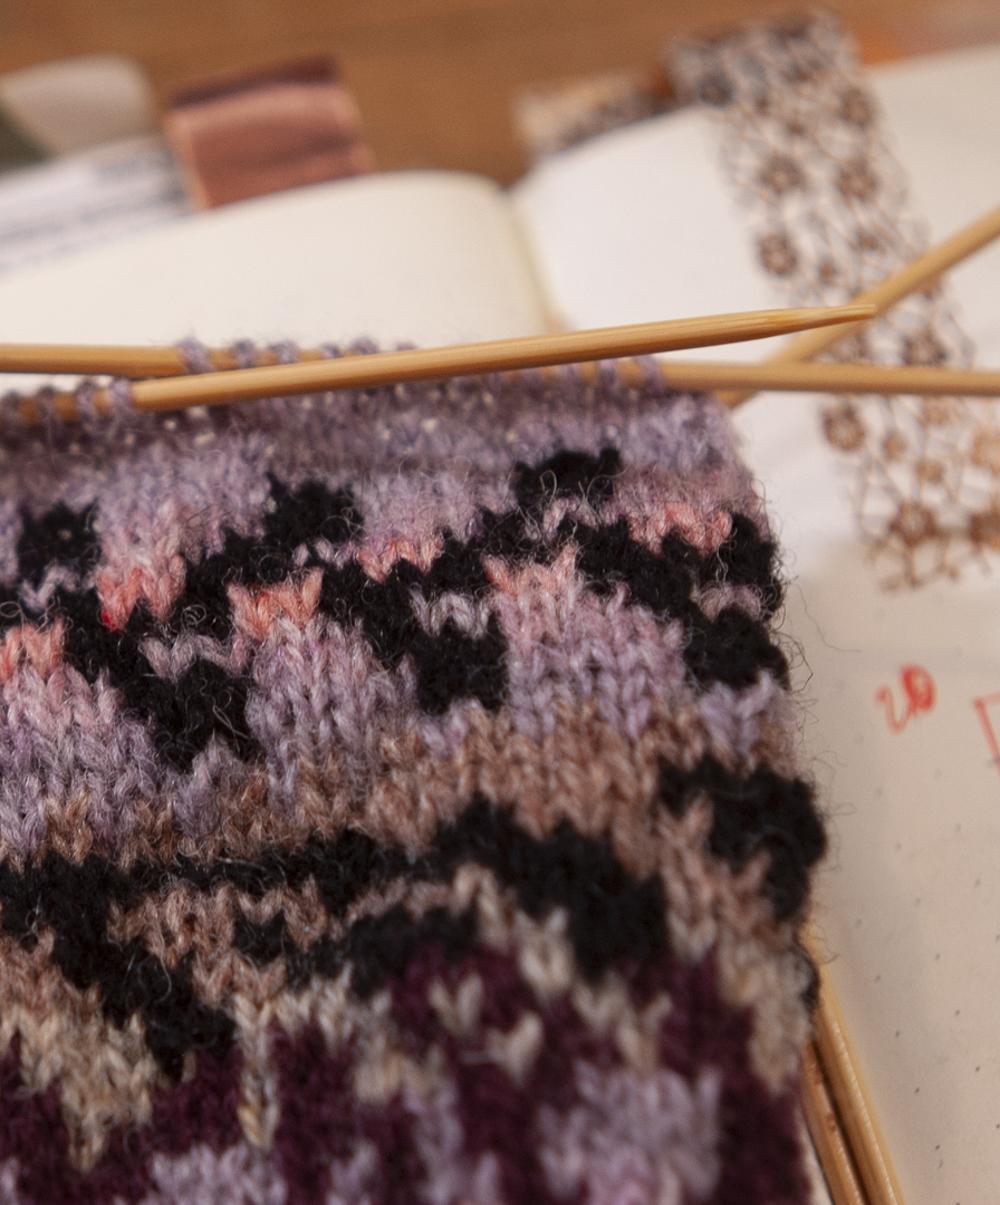 a swatch on the needles - the lilac, pink and black yarns picked out to represent the tin are being knit here in patterns that speak to design details on the inspiration source